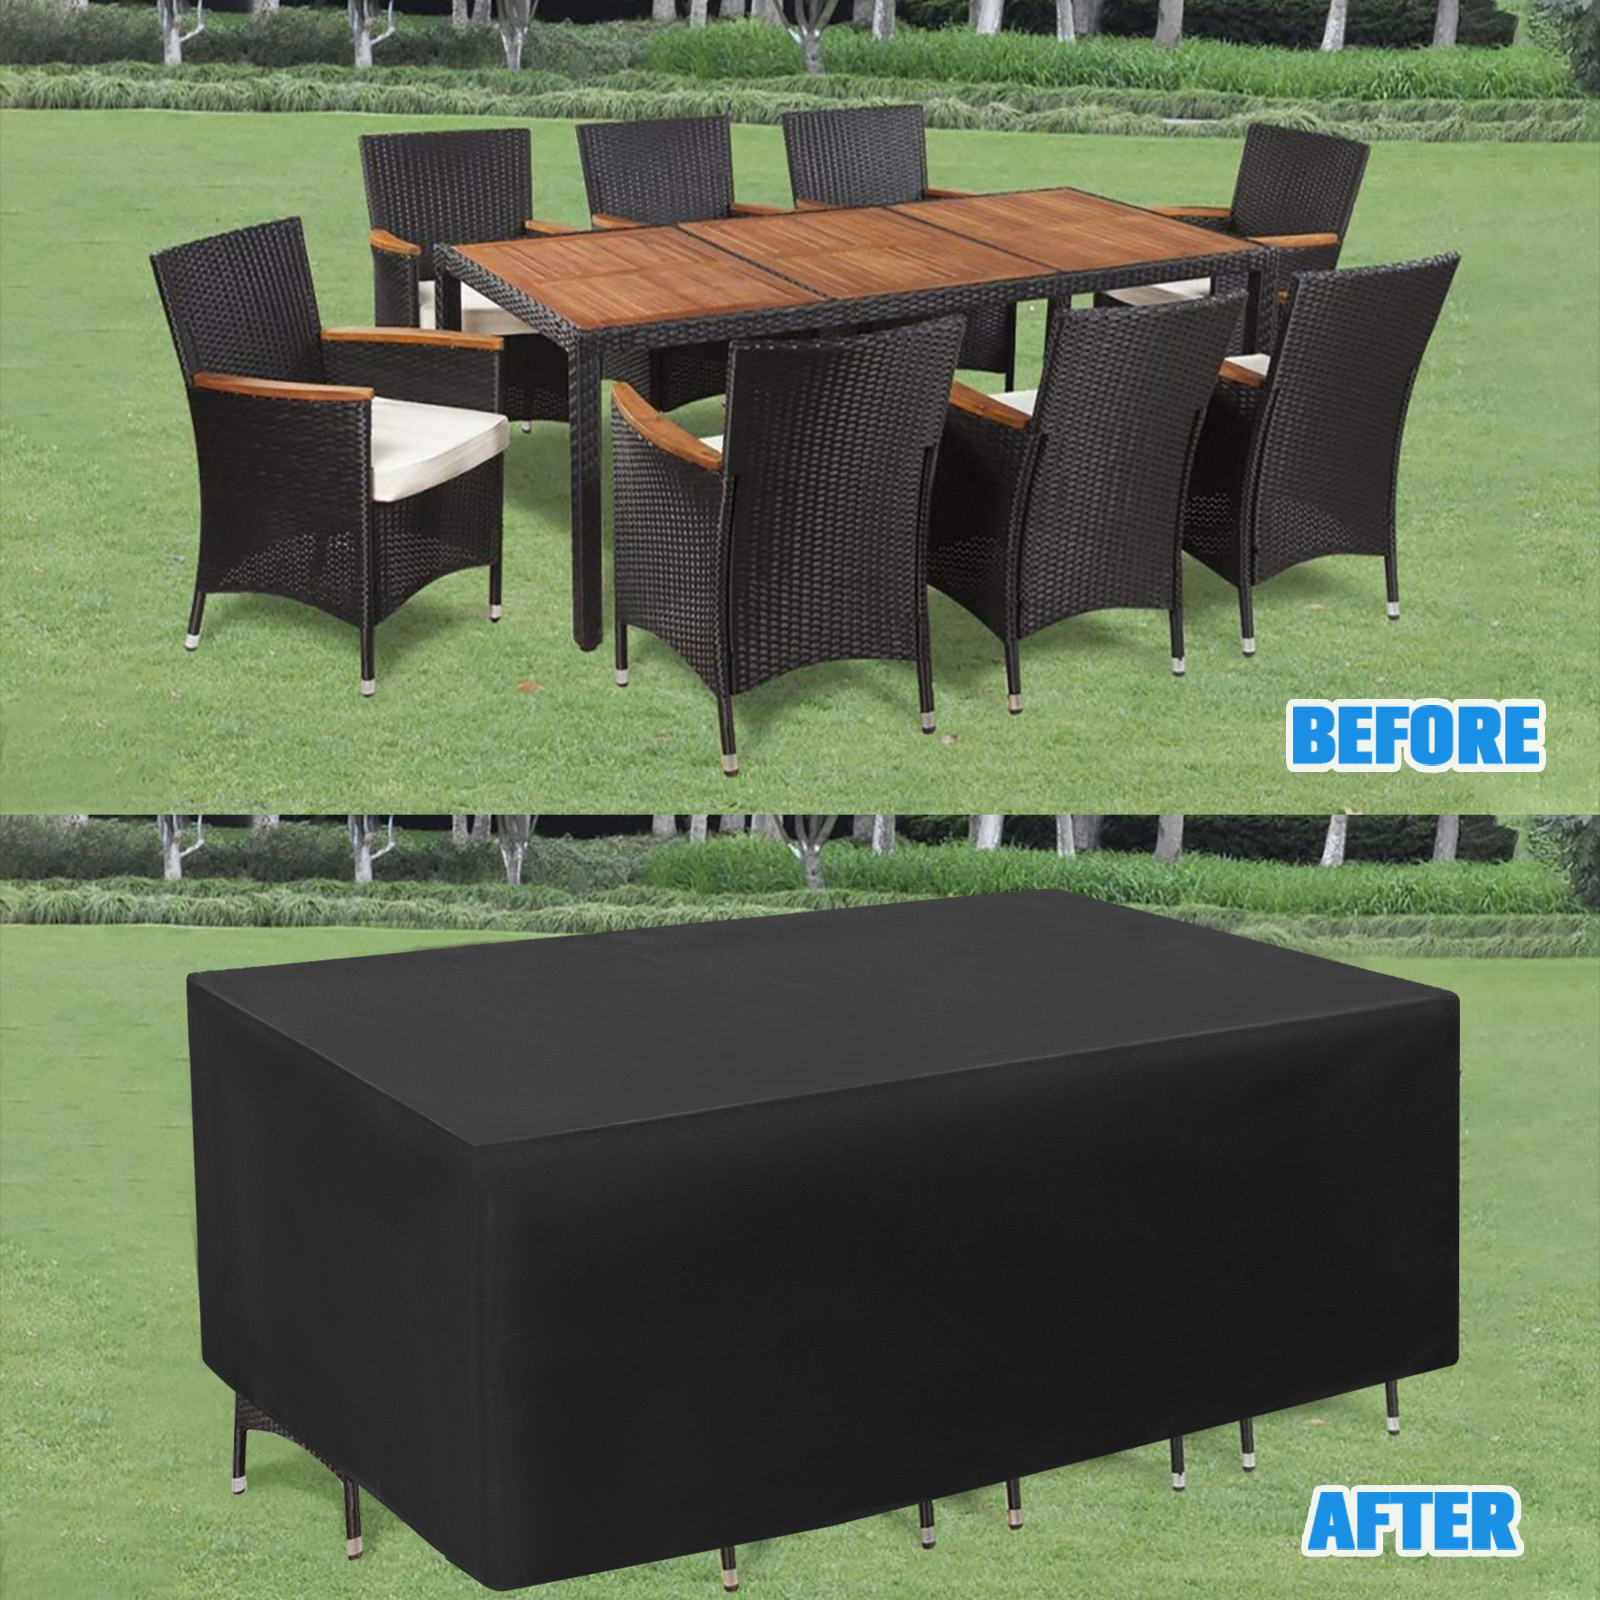 NASUM-420D-Oxford-Cloth-Table-Cover-Waterproof-Anti-UV-Snow-Protection-Furniture-Cover-1895931-6